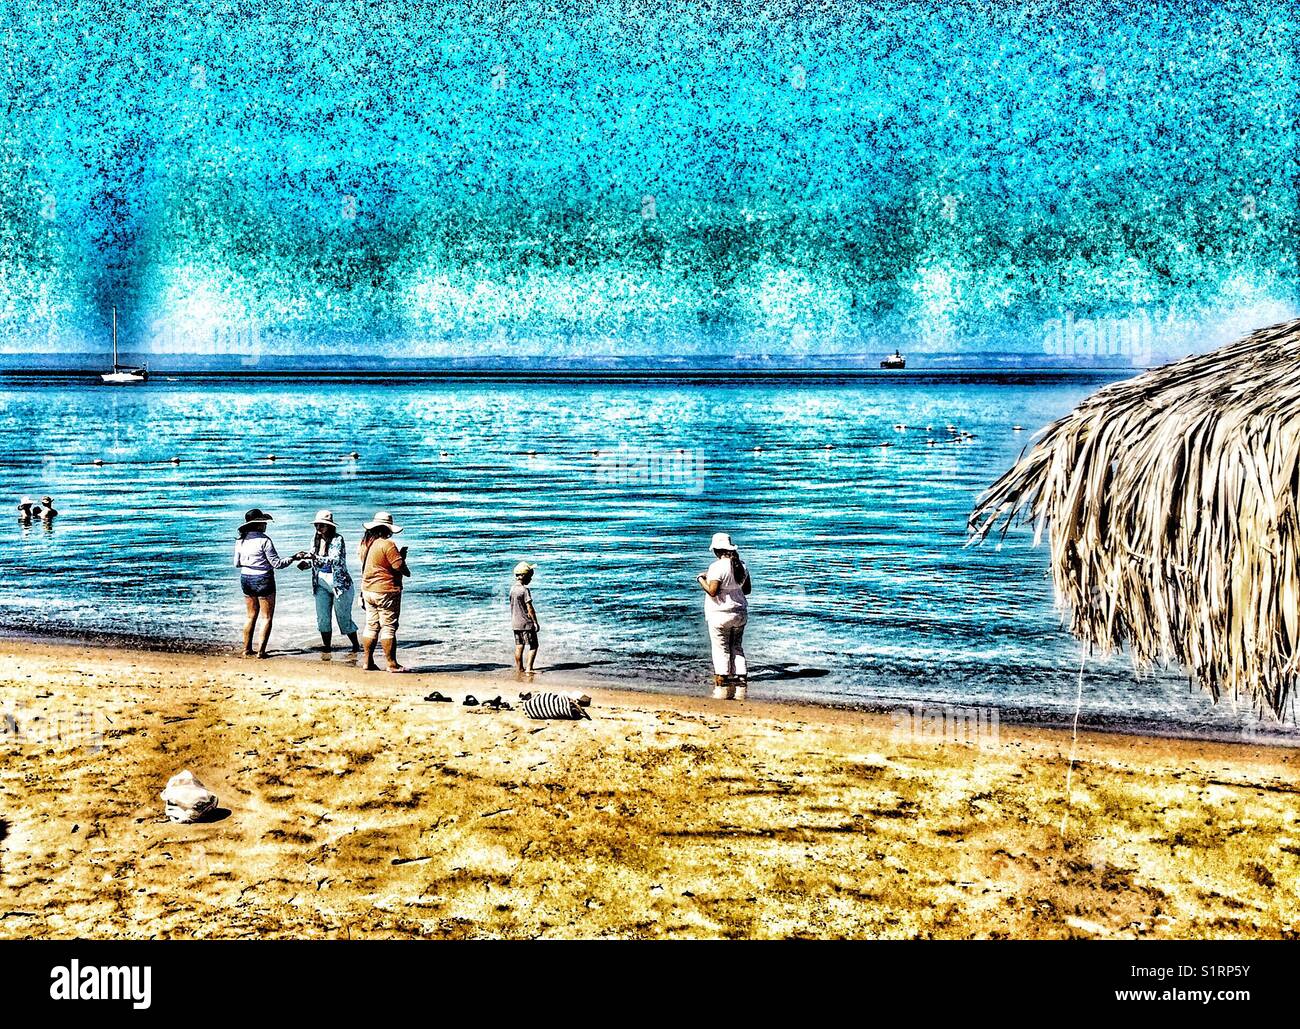 Artistic impression of vacationers standing on the beach. Stock Photo